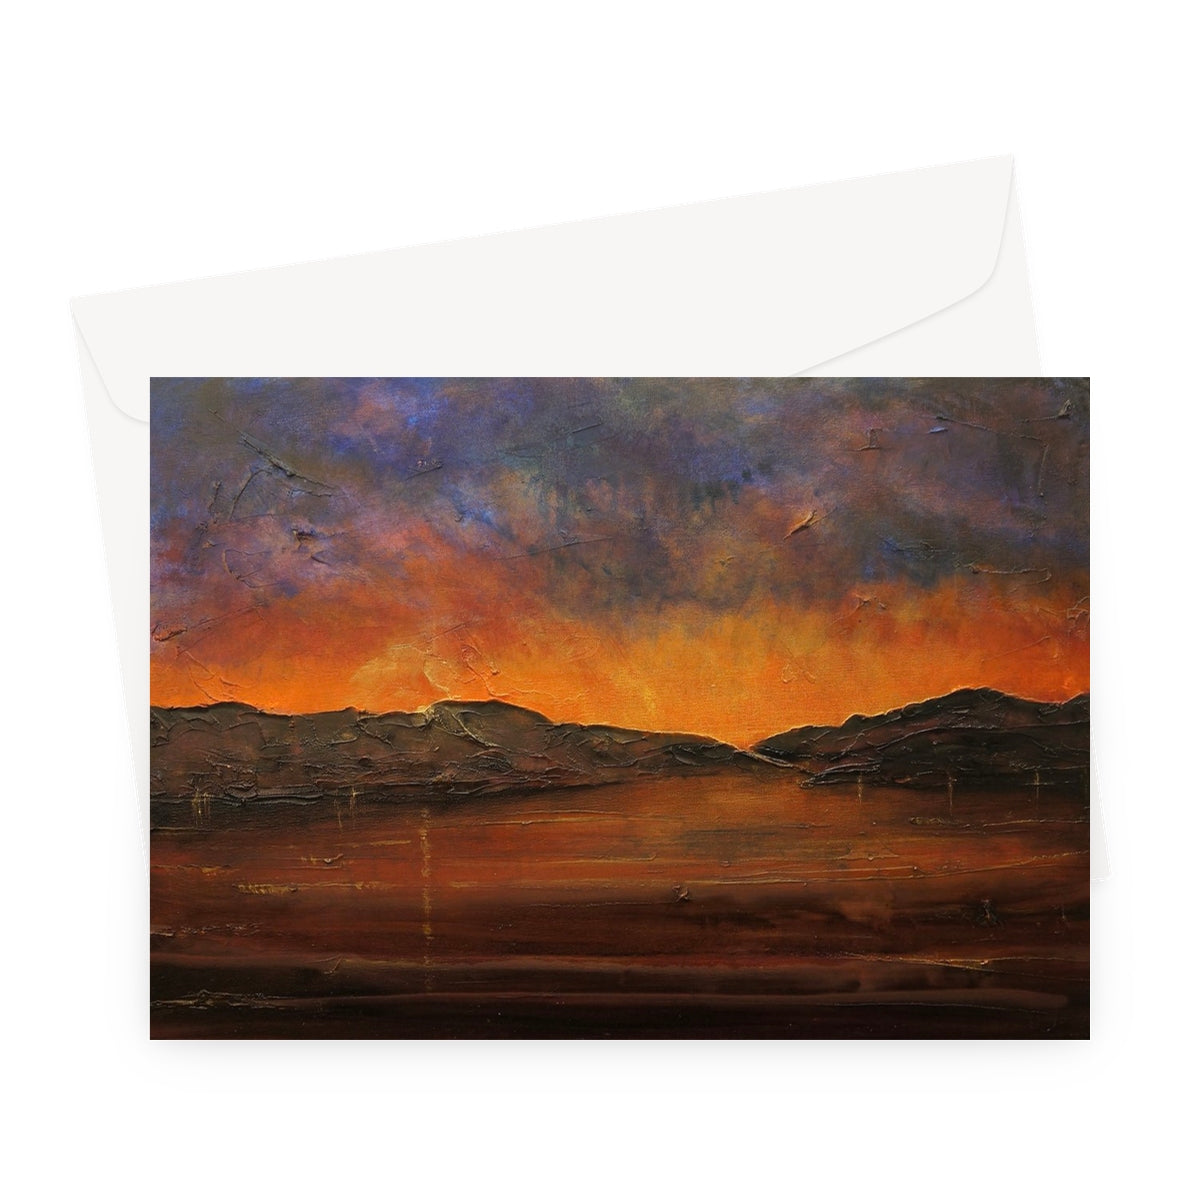 A Brooding Clyde Dusk Art Gifts Greeting Card-Stationery-River Clyde Art Gallery-A5 Landscape-10 Cards-Paintings, Prints, Homeware, Art Gifts From Scotland By Scottish Artist Kevin Hunter